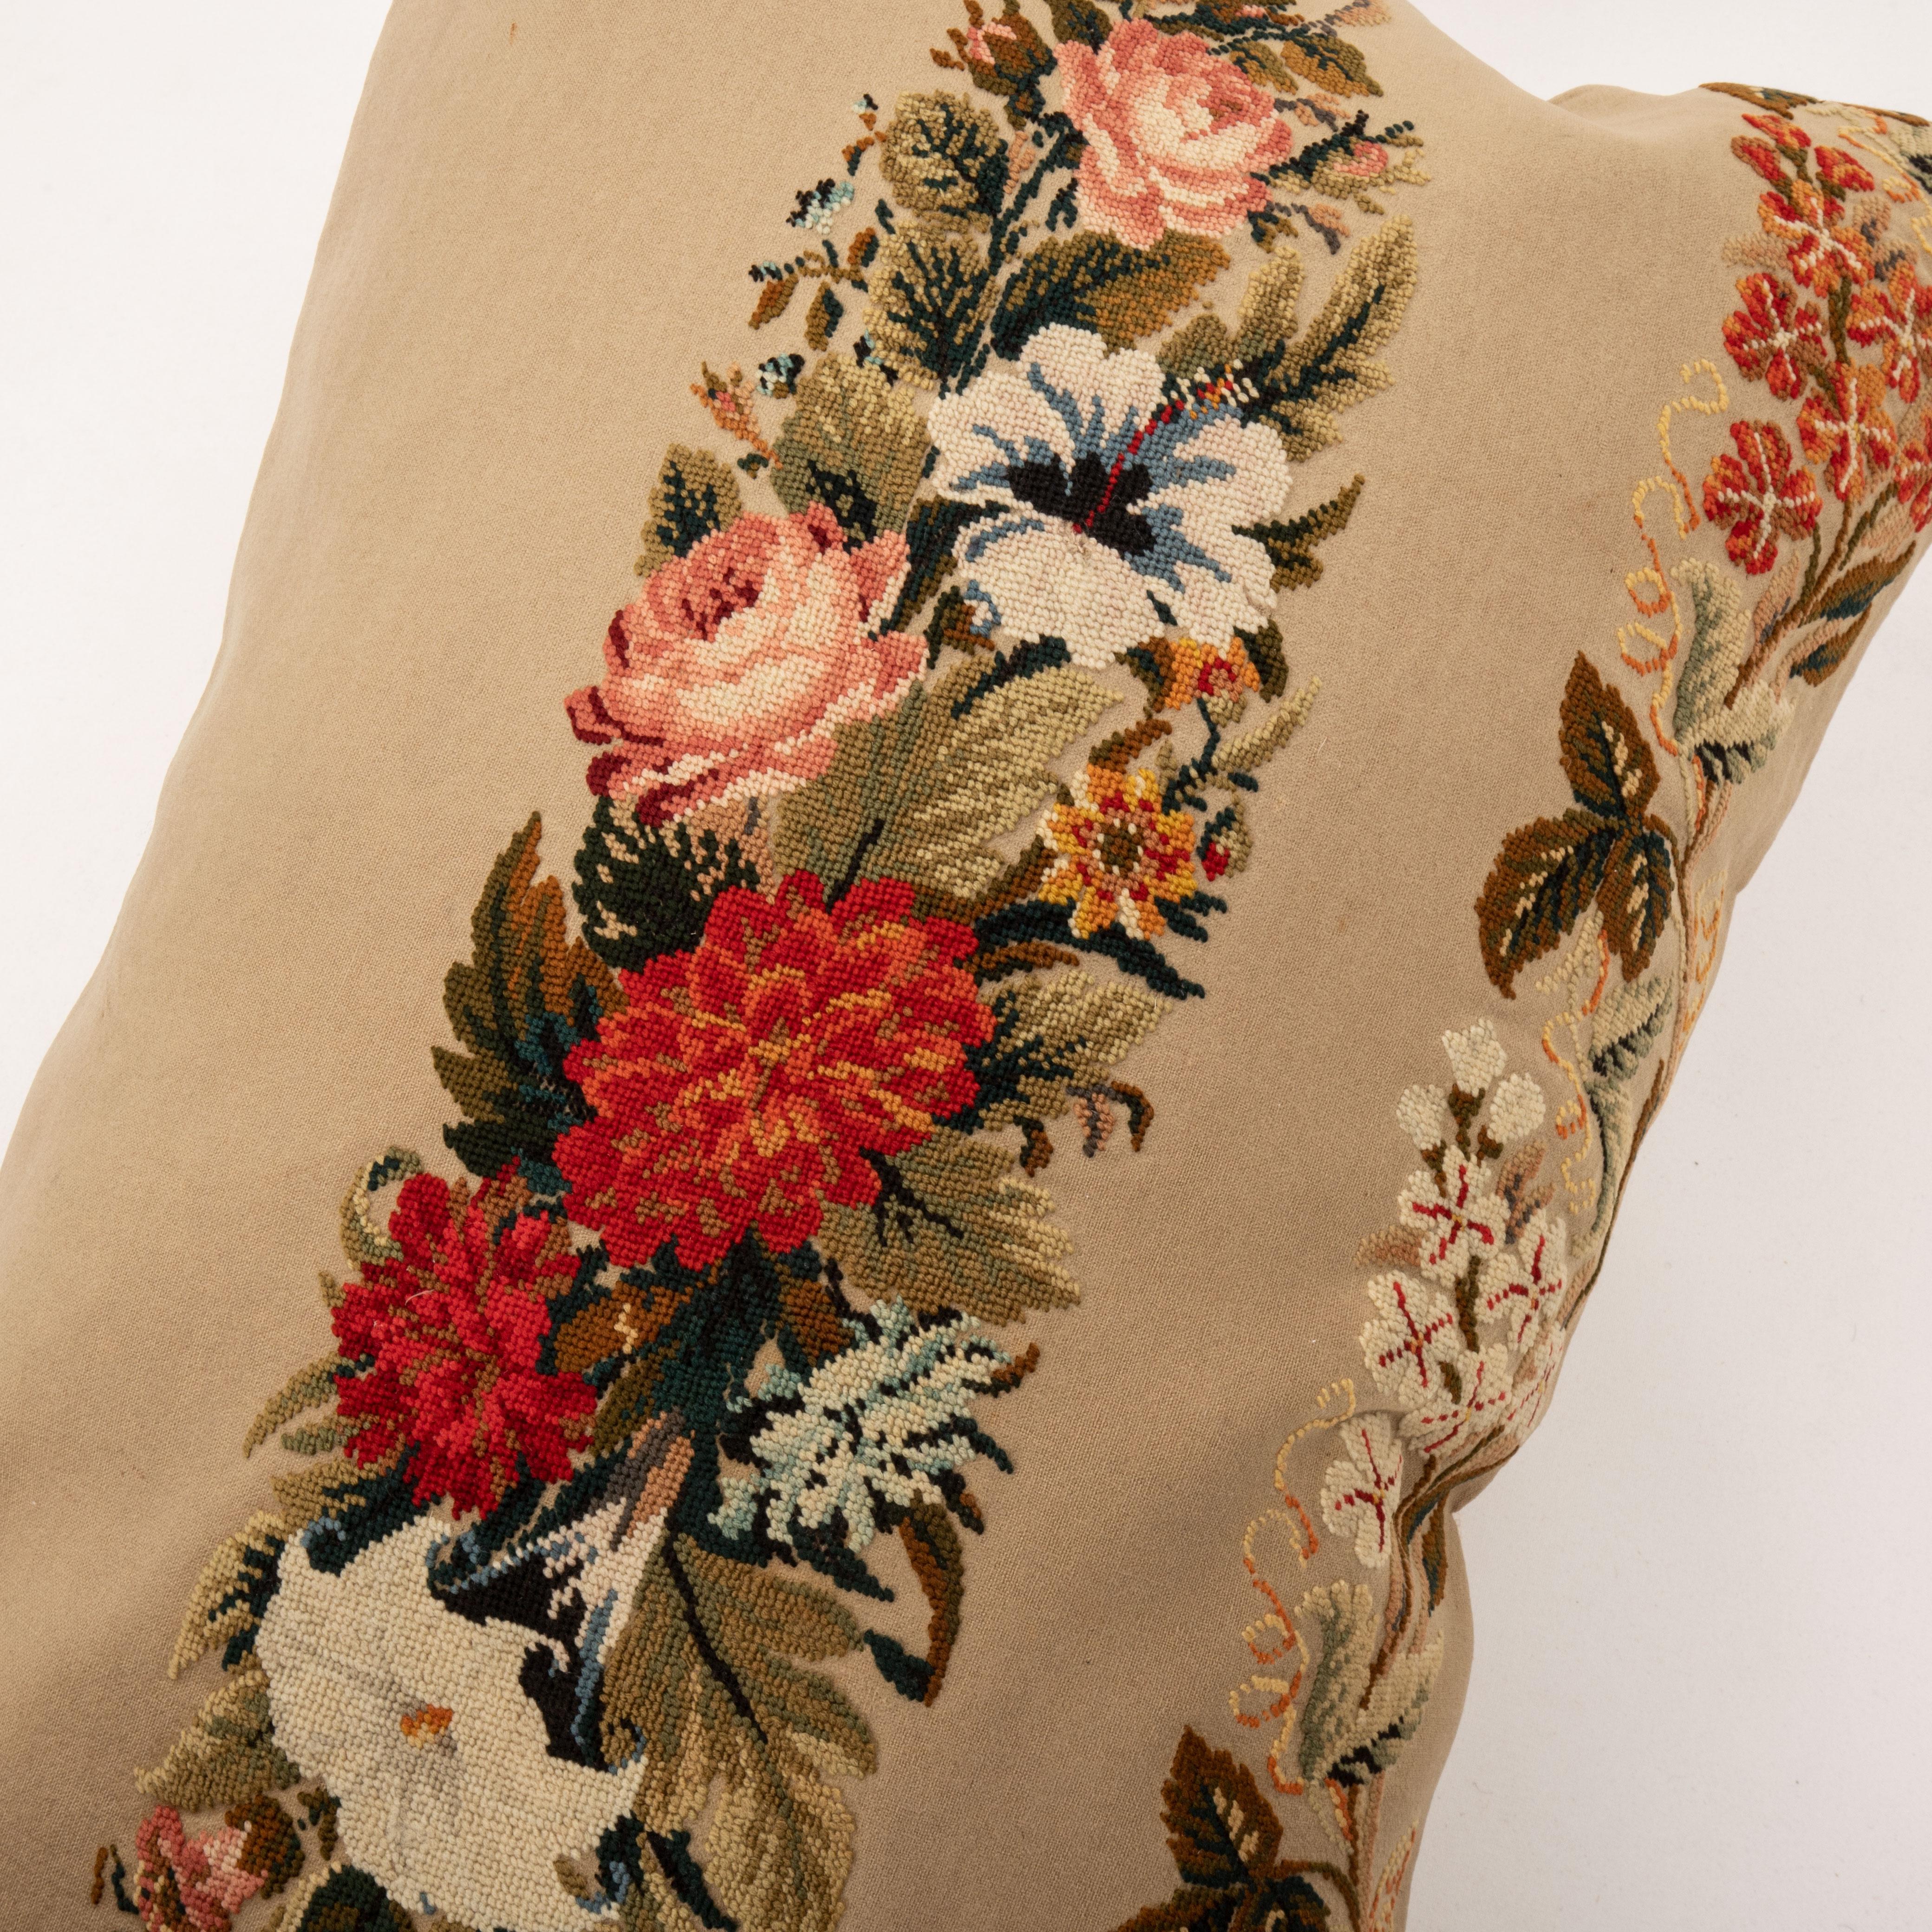 20th Century Pillow Case Made from a European Embroidery, E 20th C.